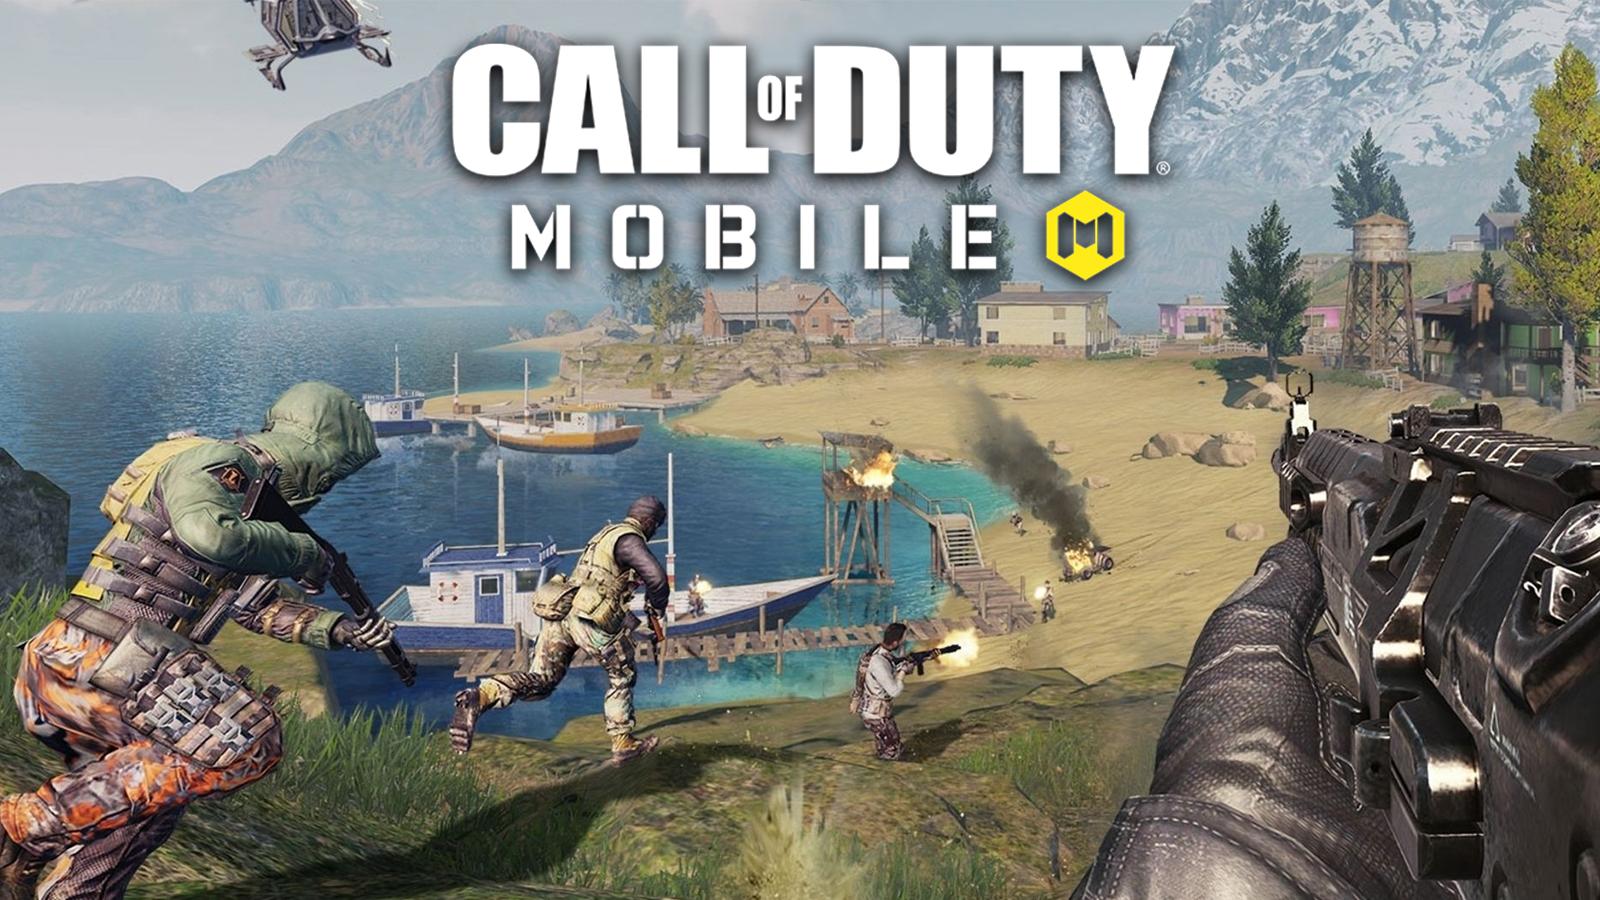 Win EVERY Battle Royale game - CALL OF DUTY MOBILE on PC Gameplay - Saving  Content